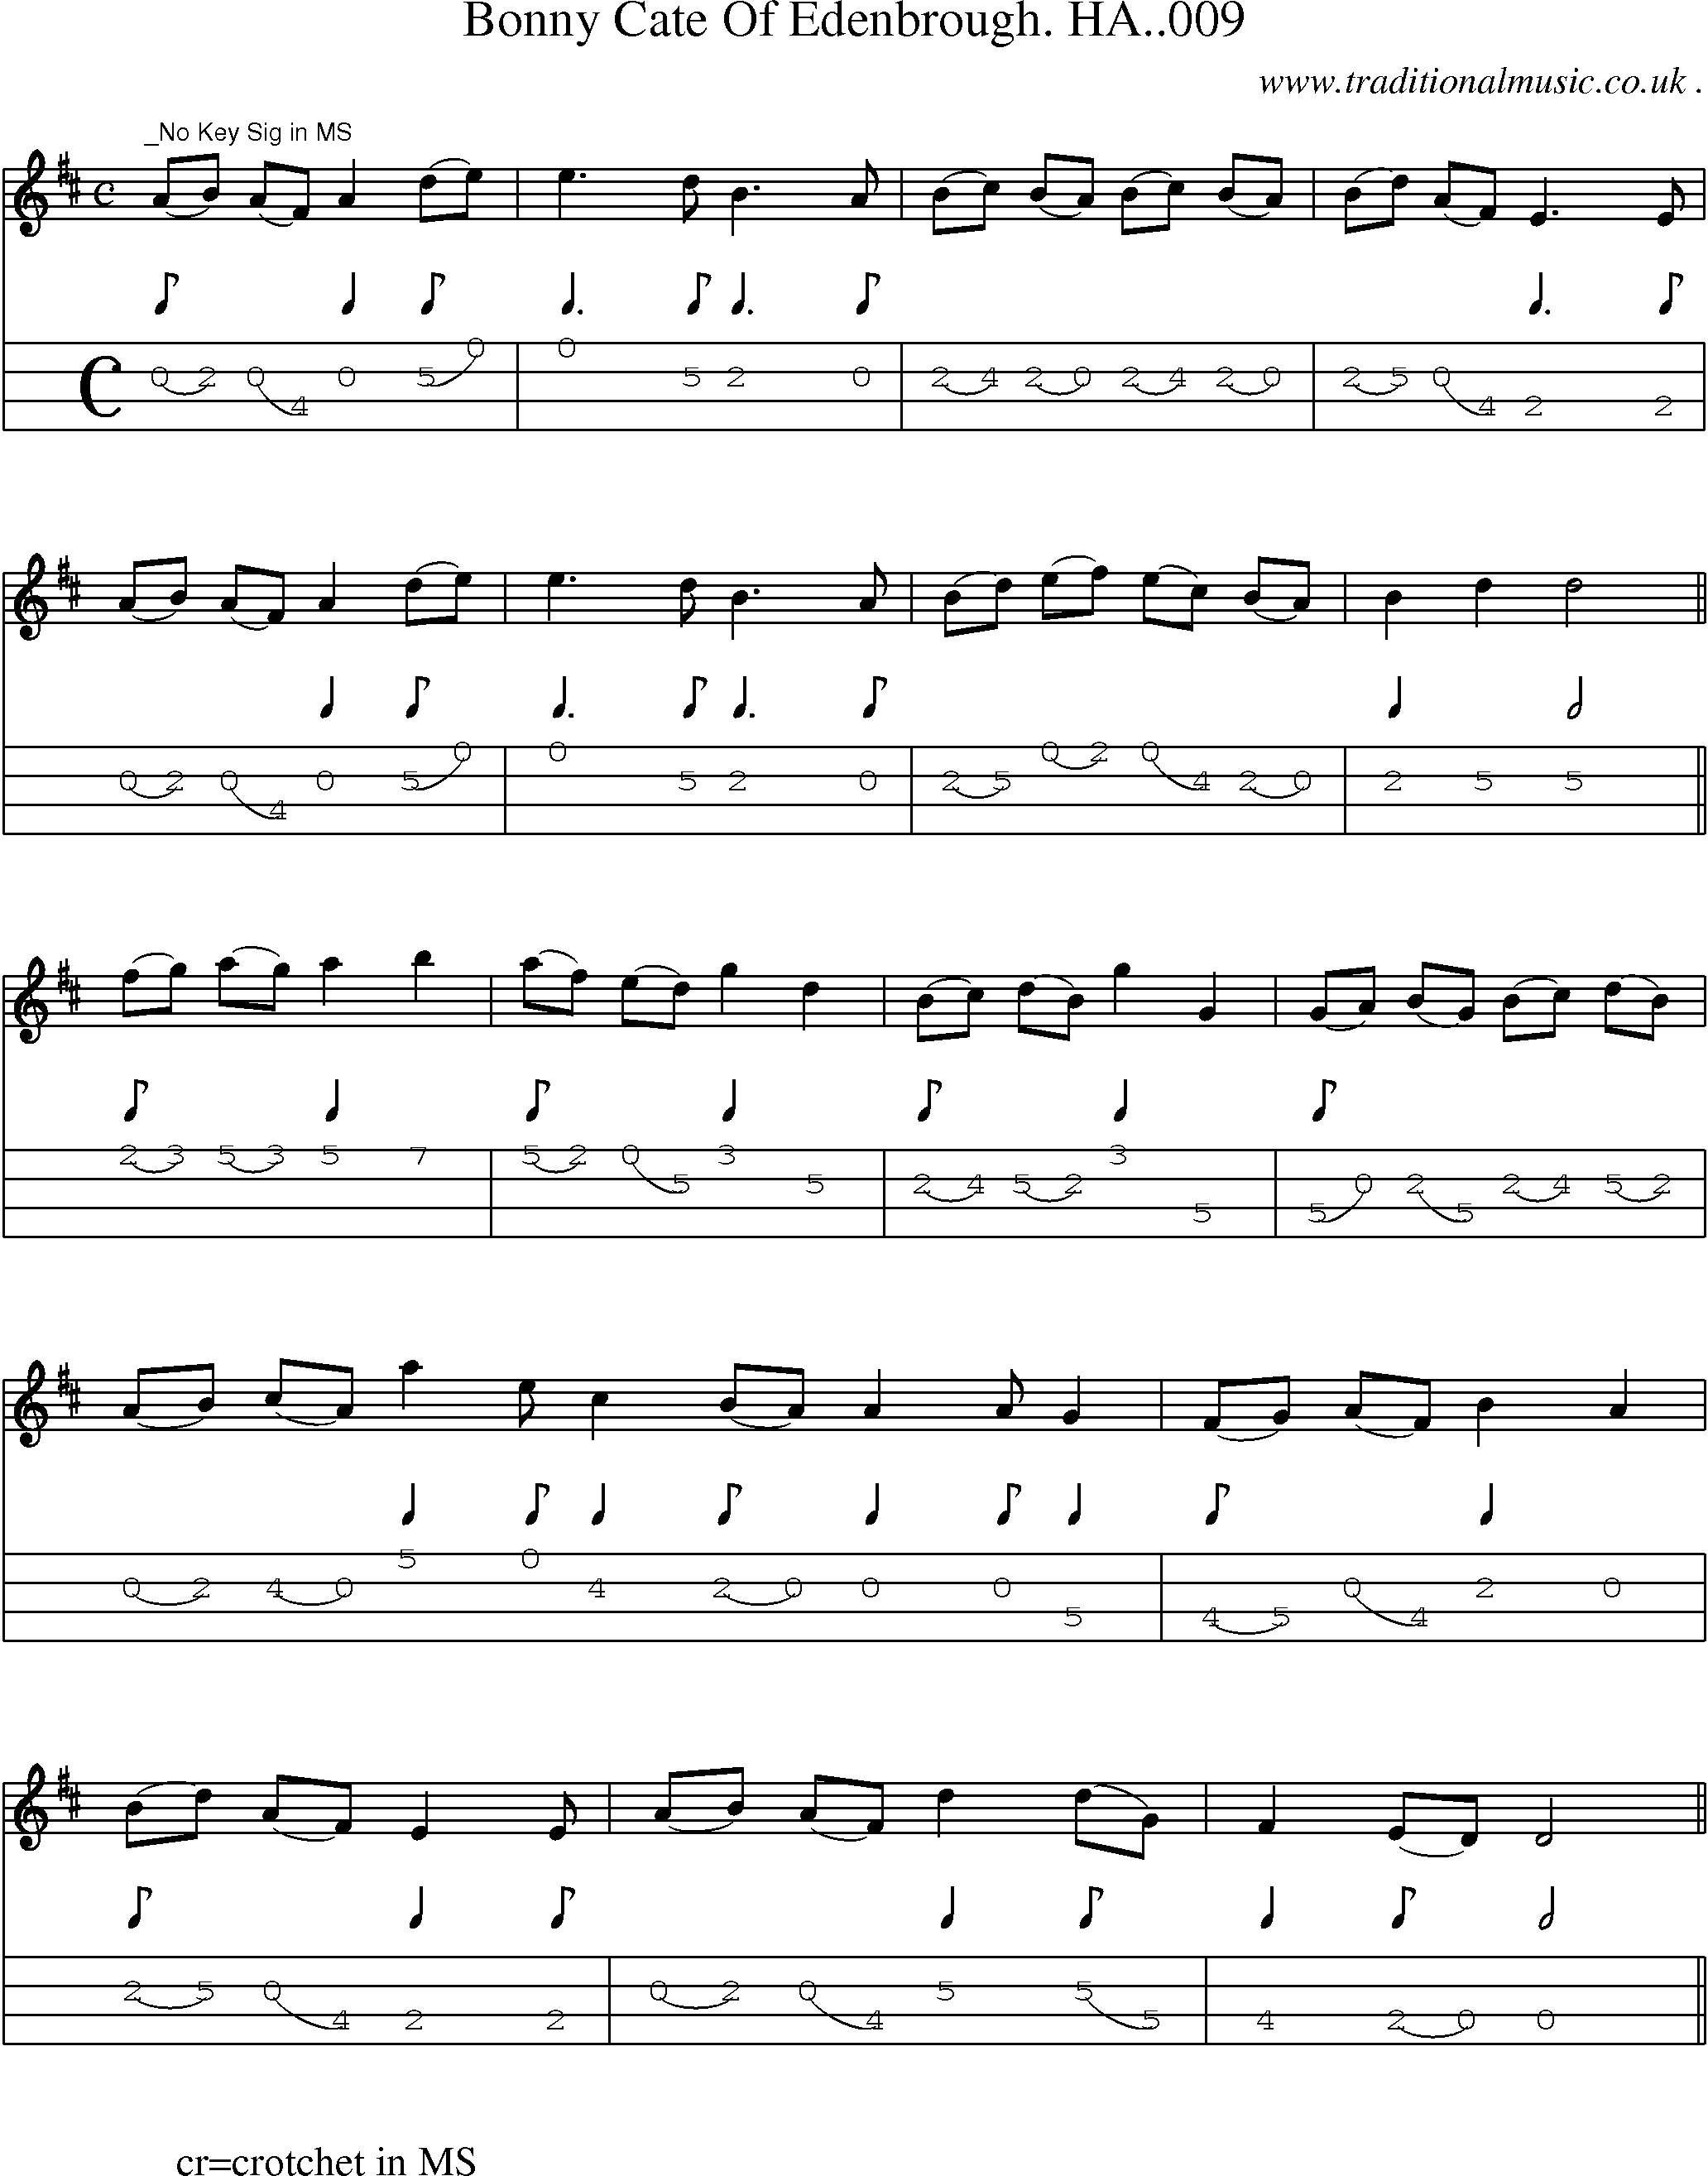 Sheet-Music and Mandolin Tabs for Bonny Cate Of Edenbrough Ha009